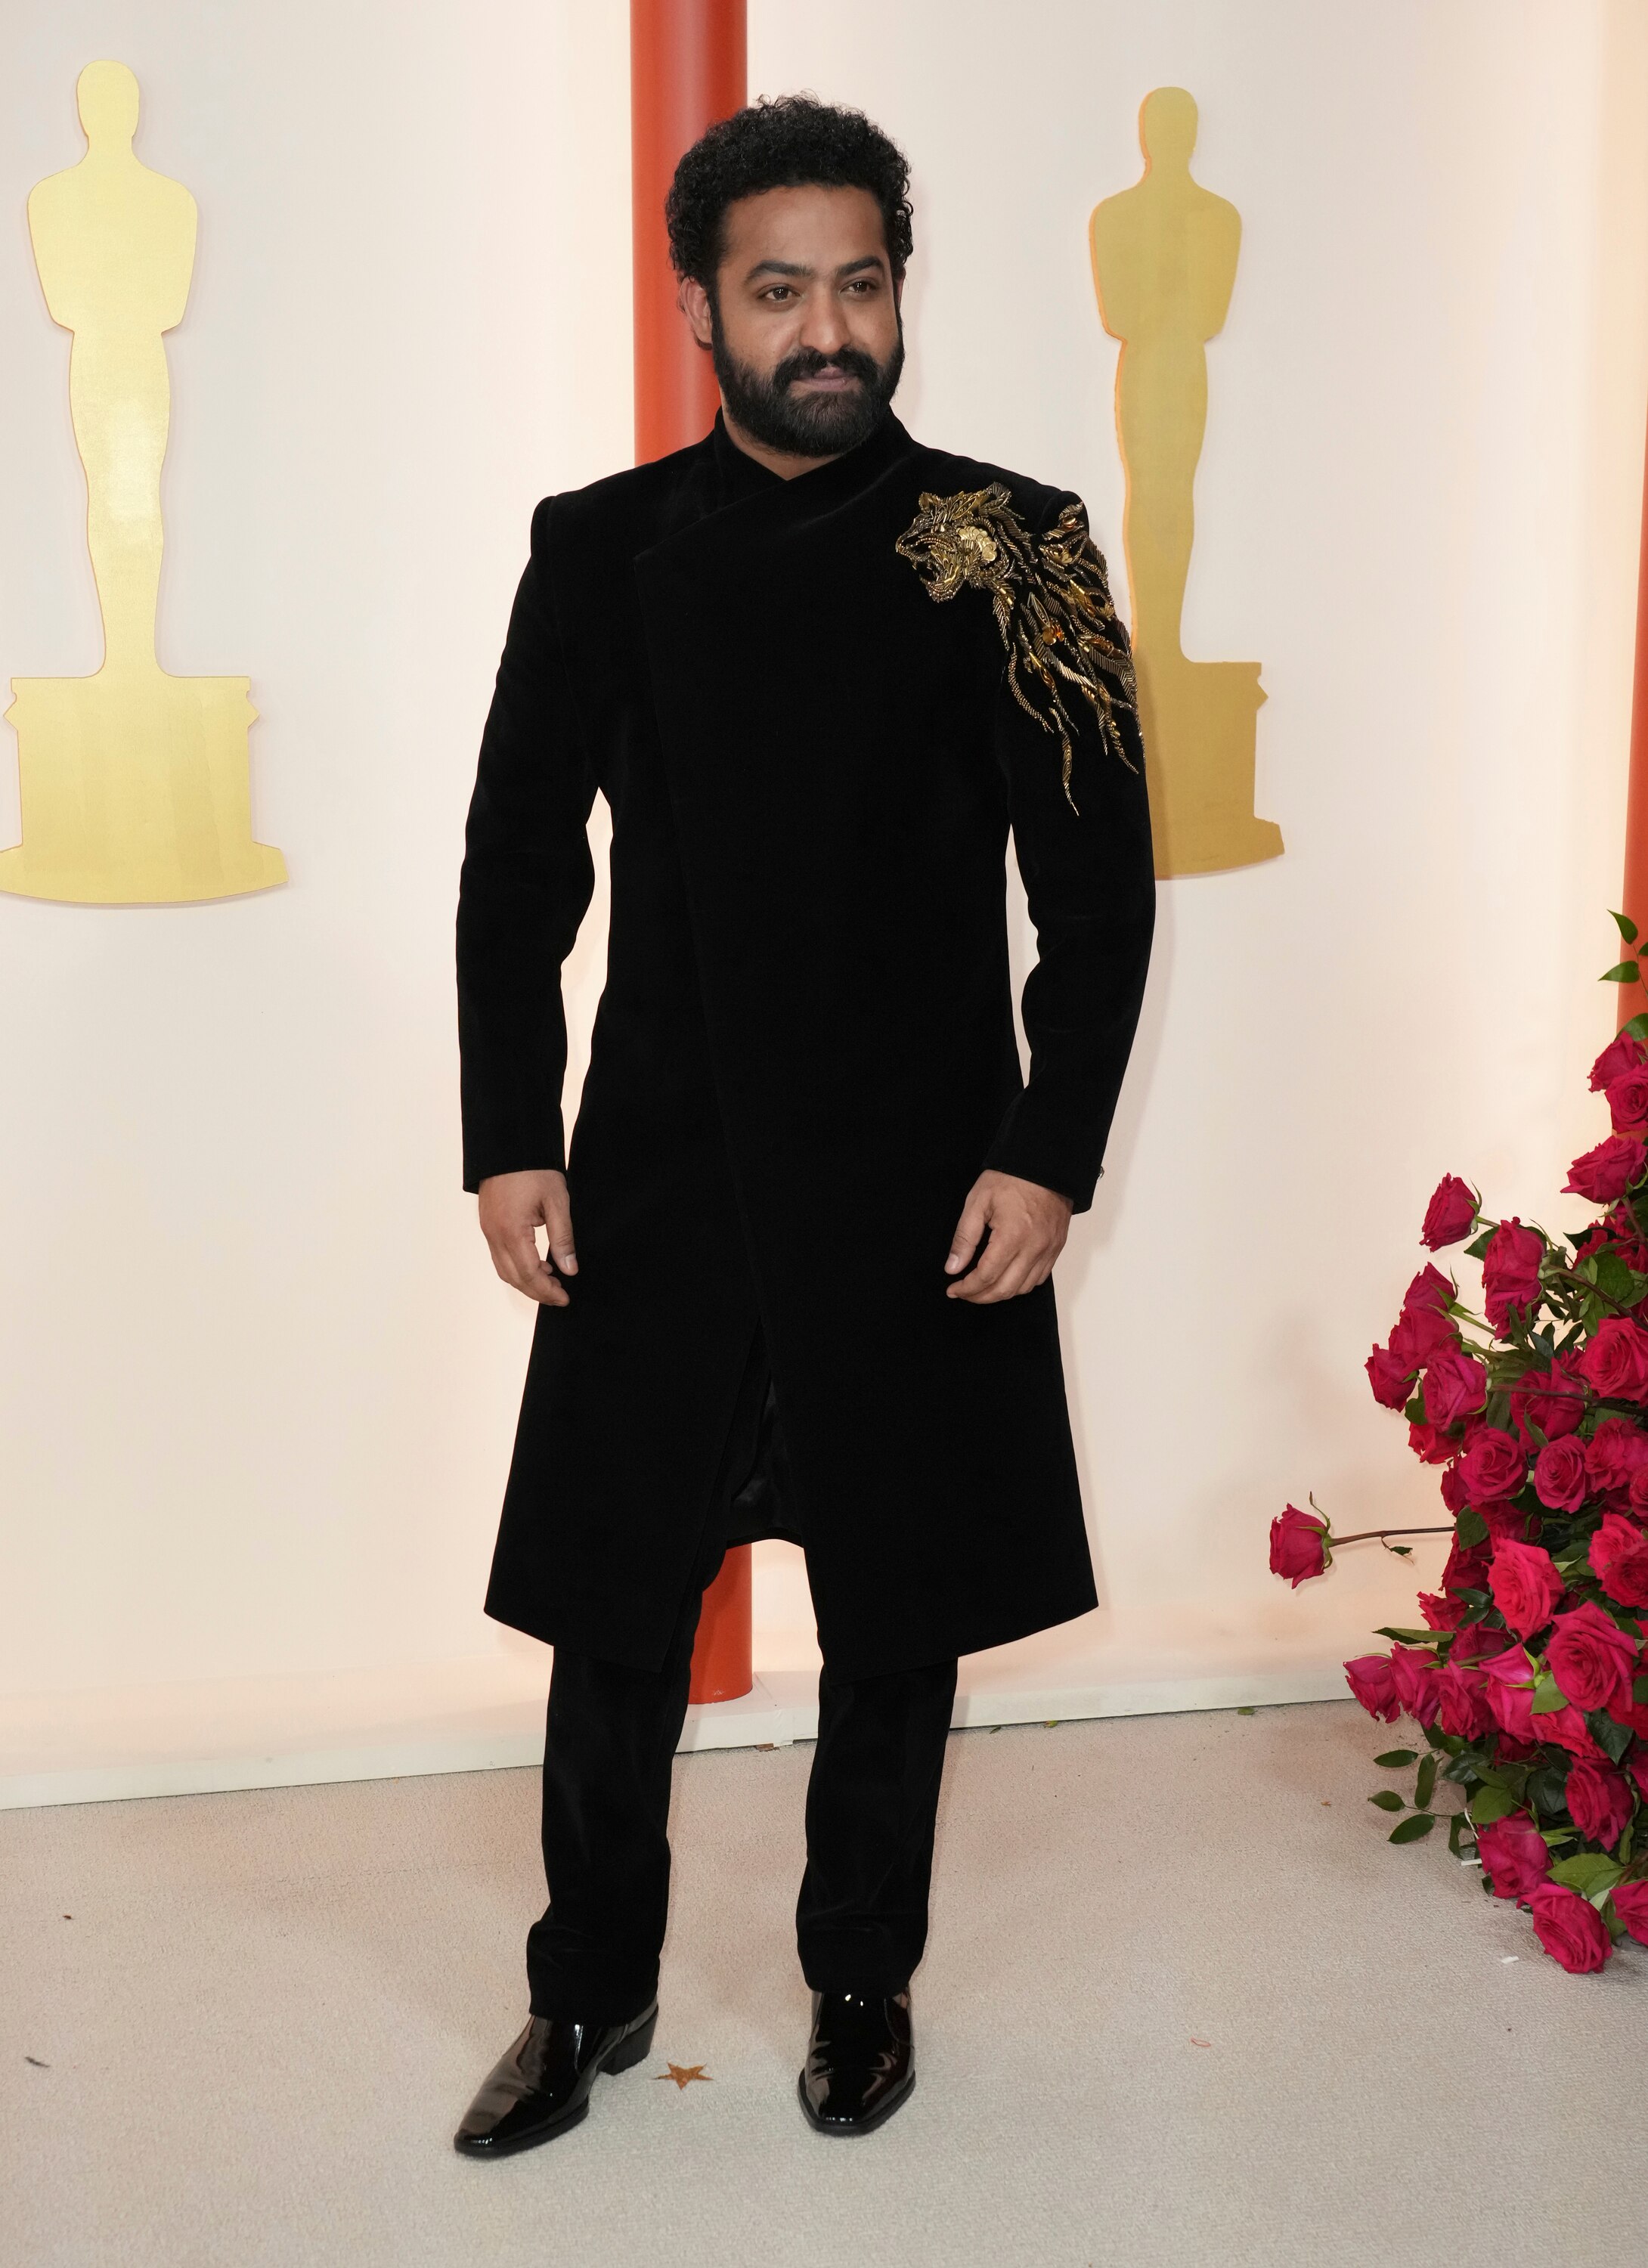 N T Rama Rao Jr wearing an all-black suit with a gold tiger embellishment on one shoulder